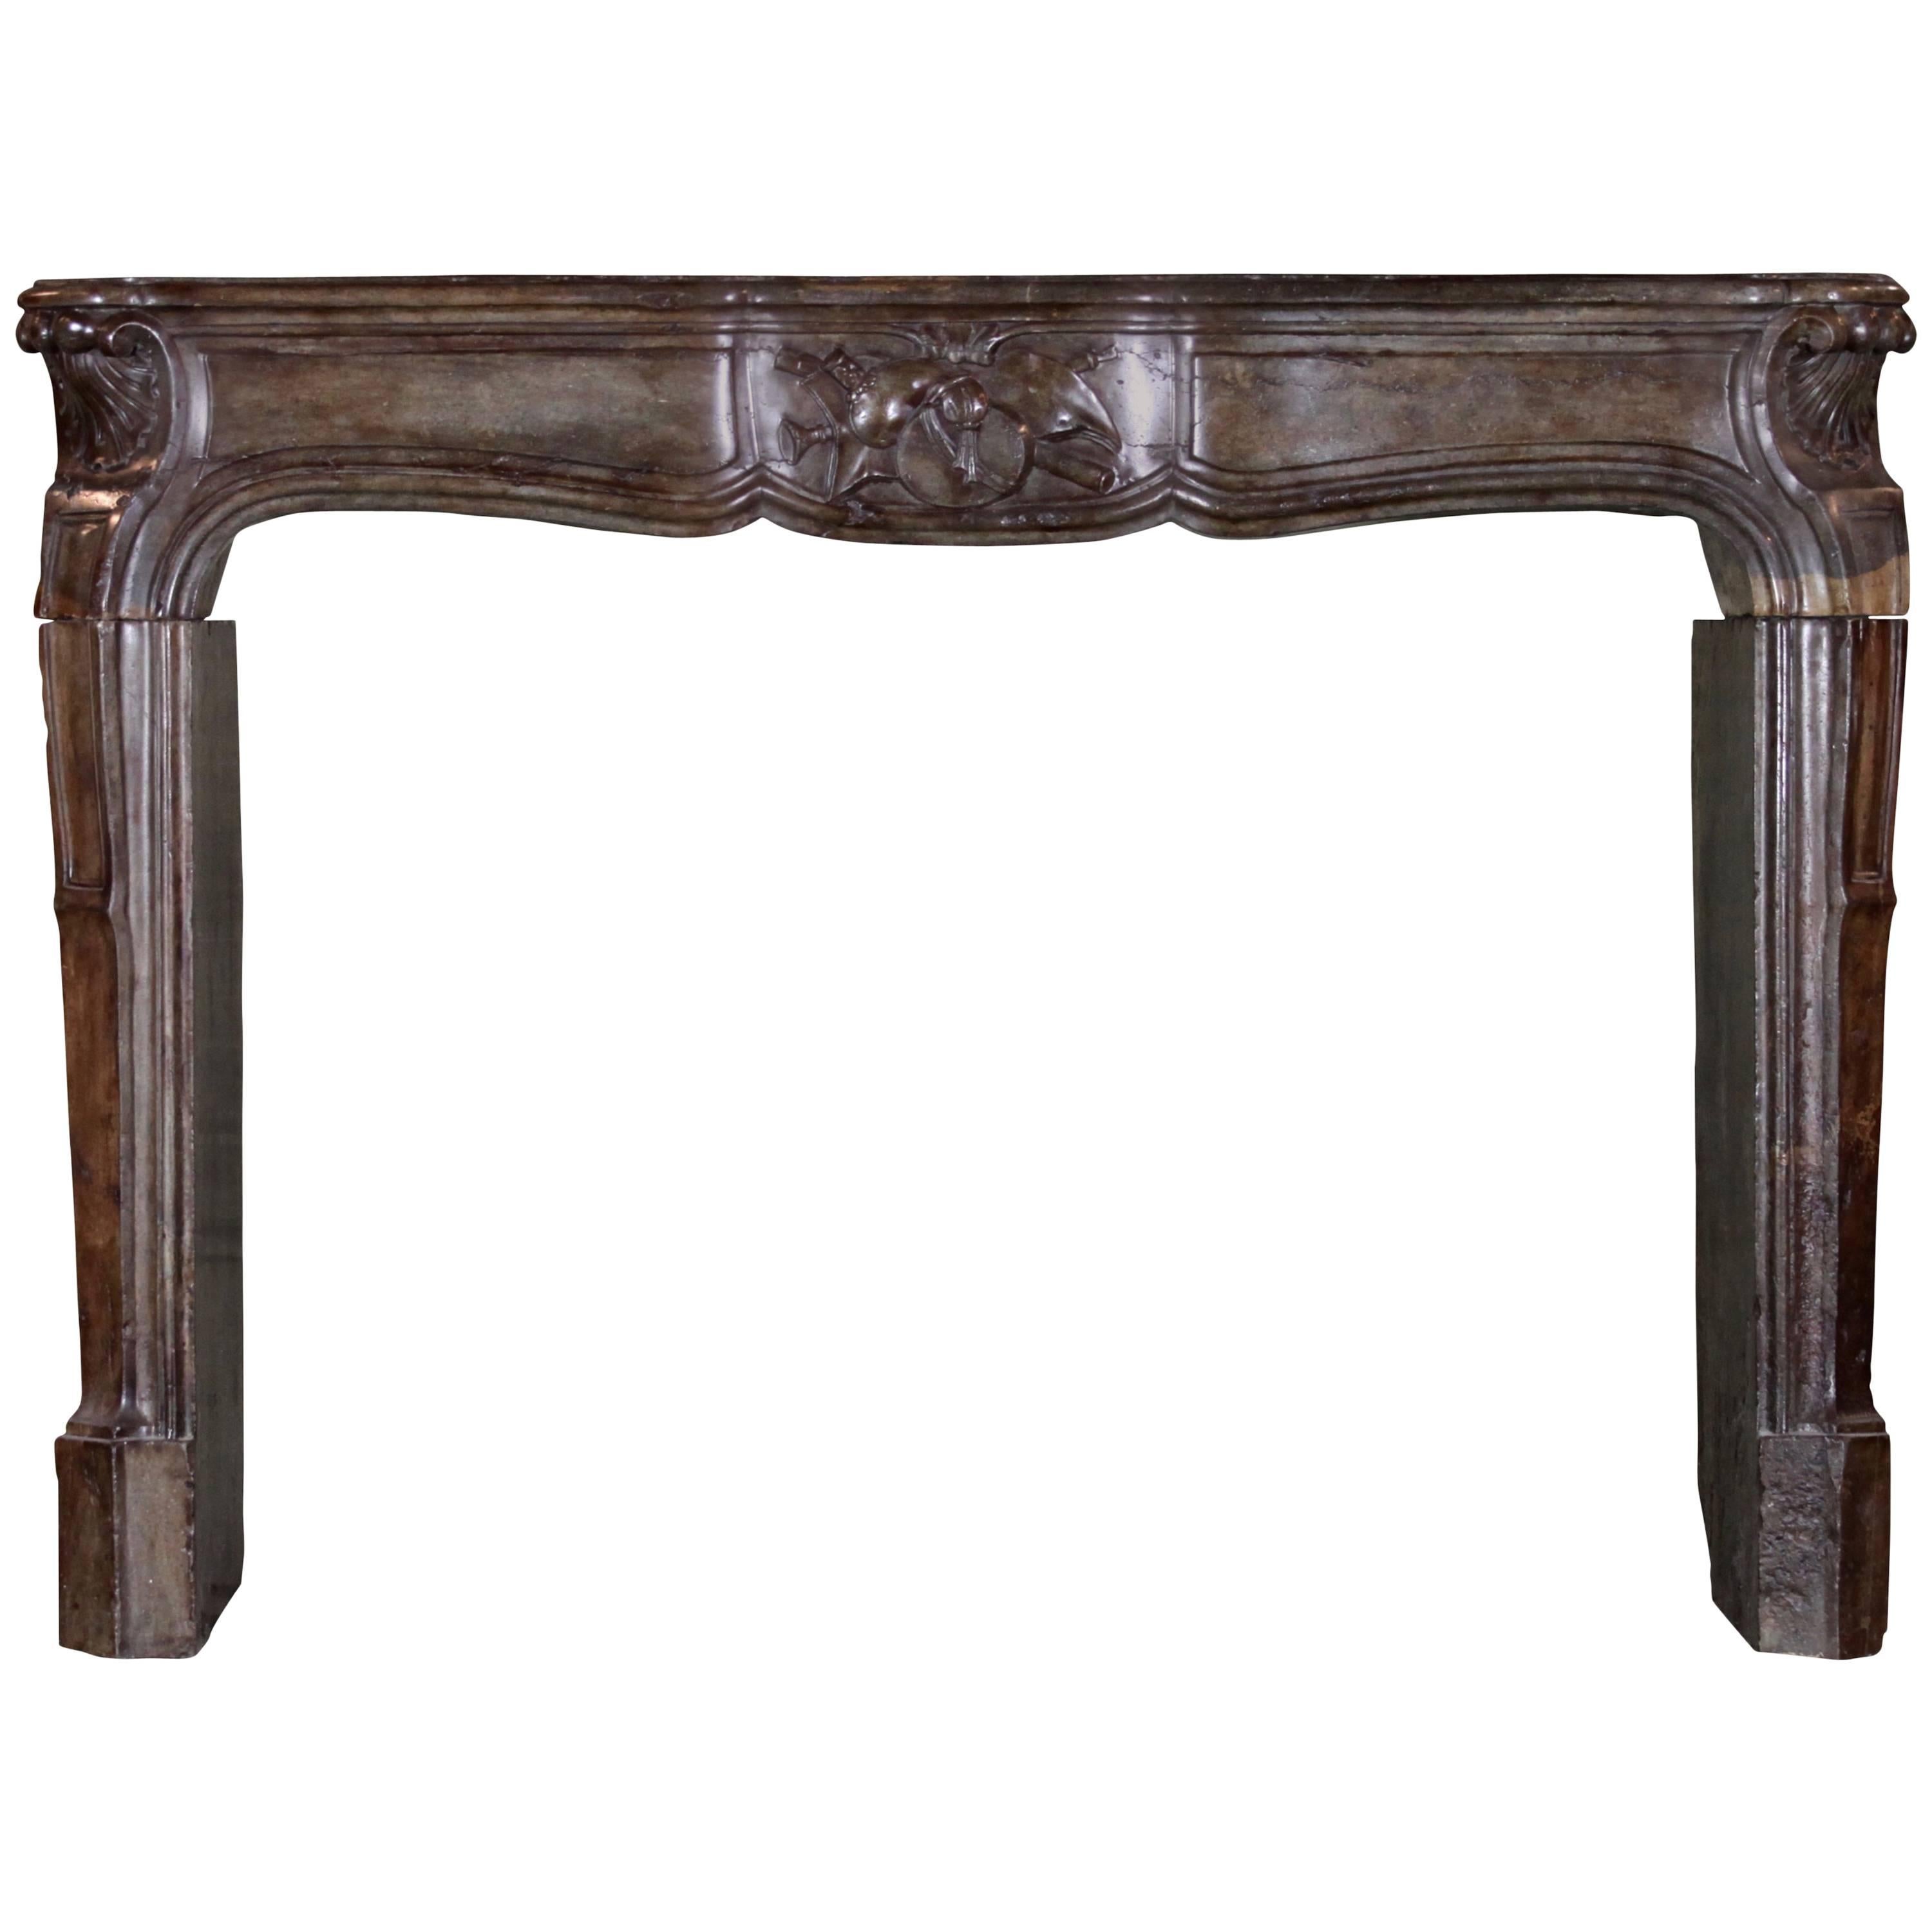 18th Century Antique Fireplace Mantel For Sale